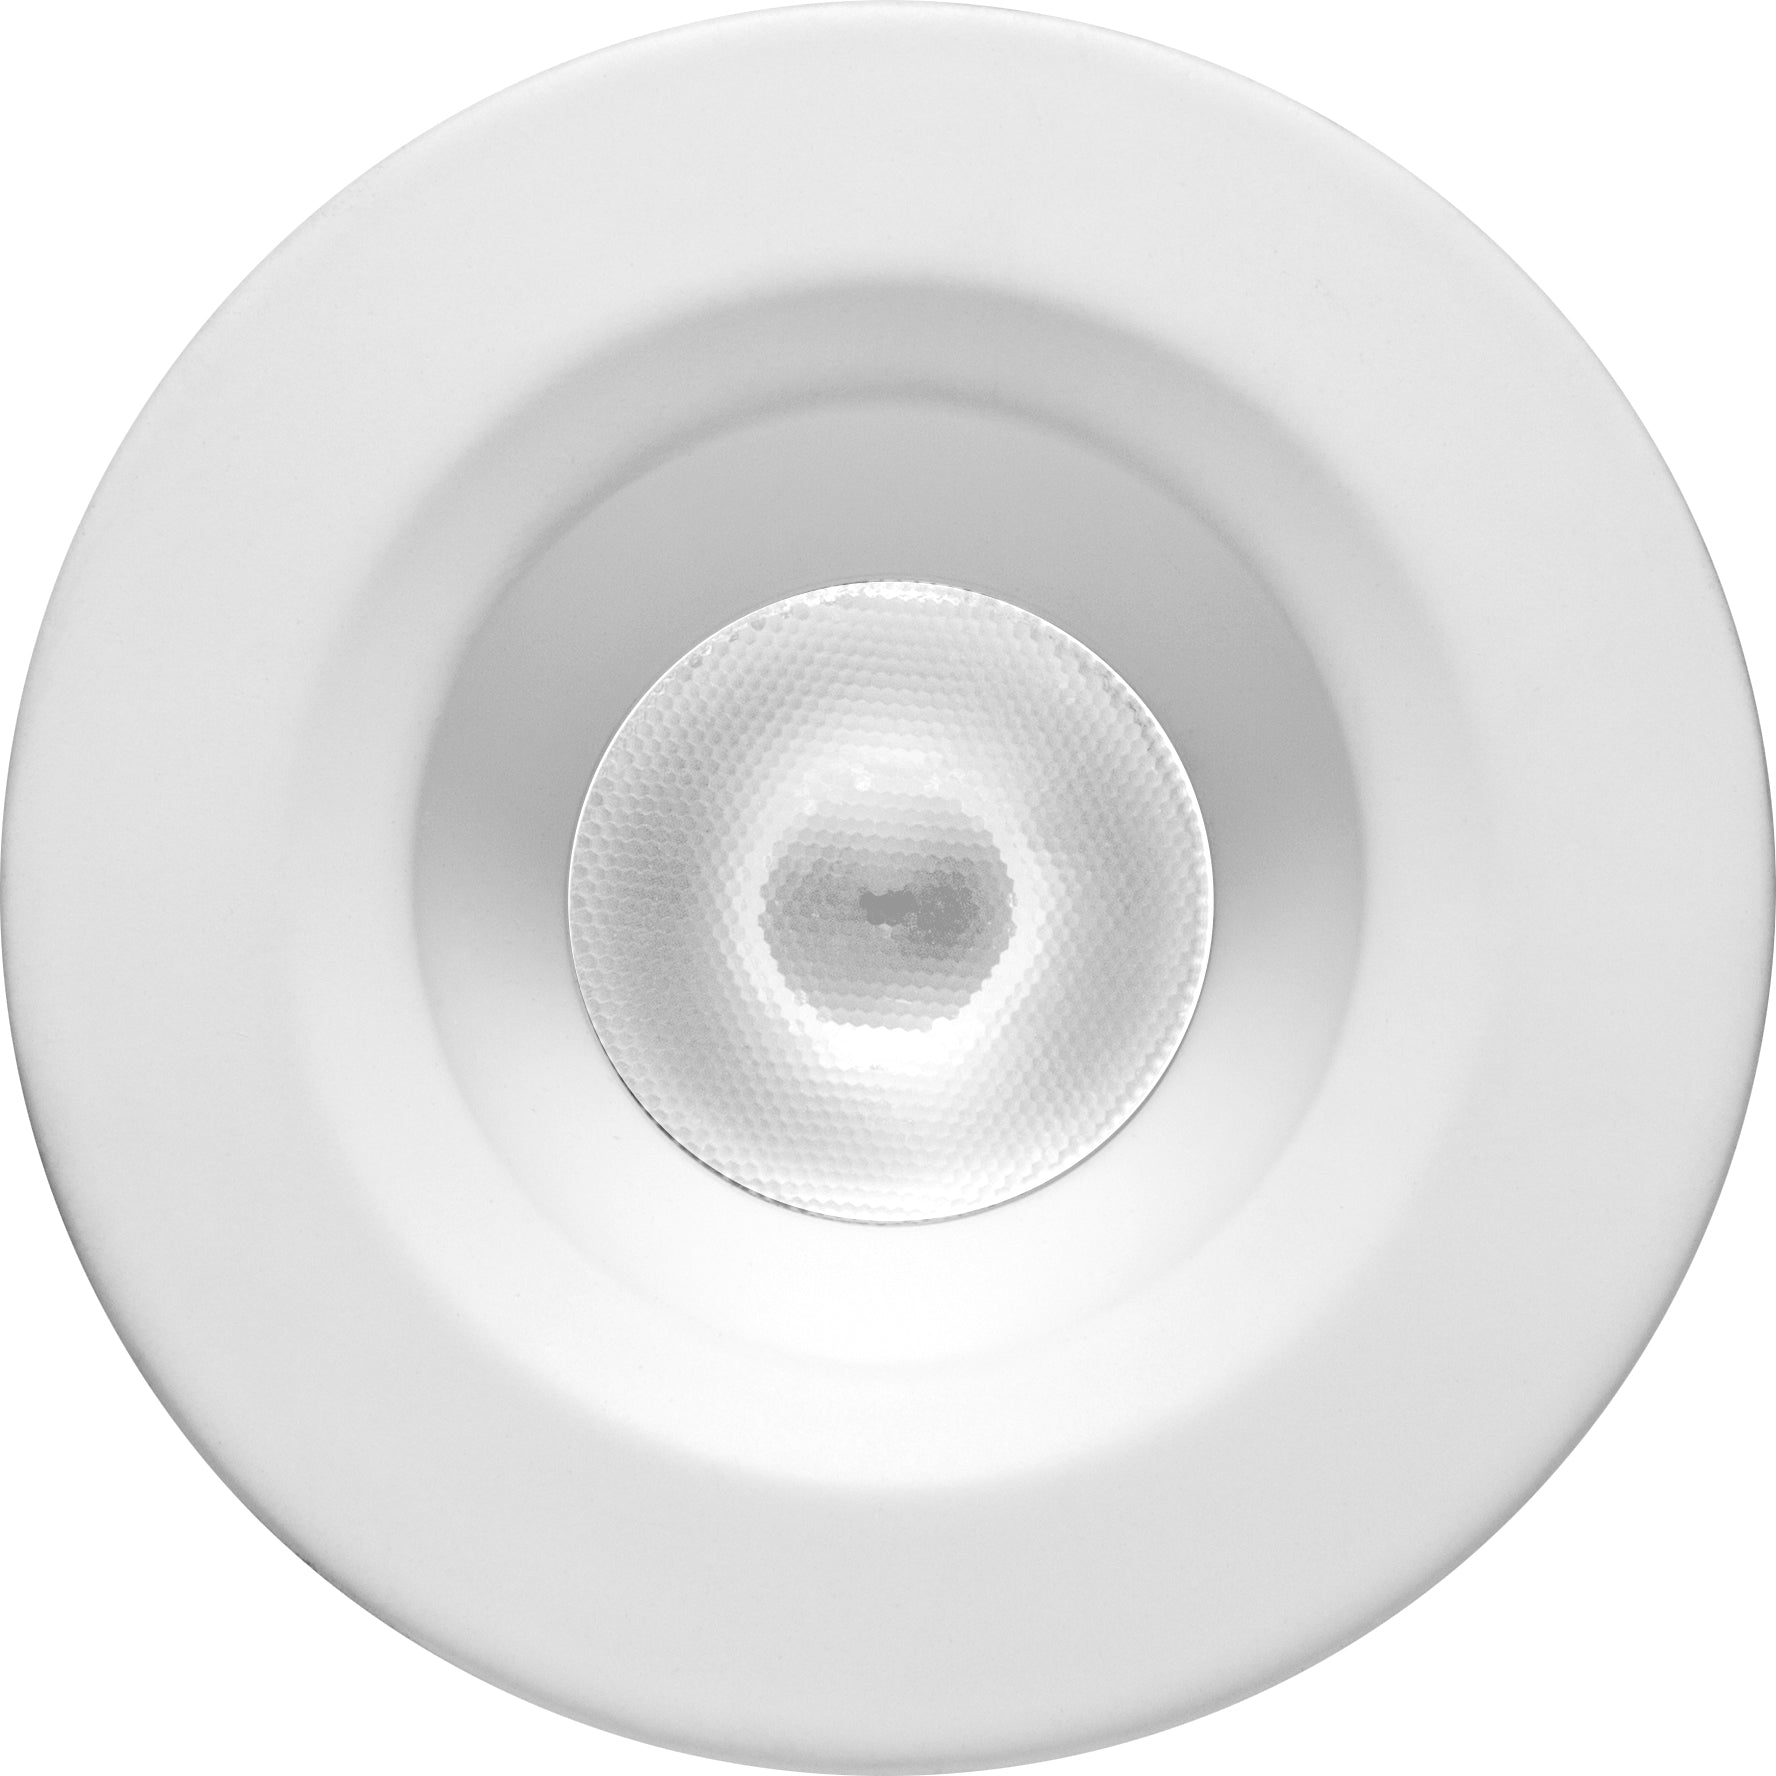 Elco 1" Round Recessed Oak™ Downlight - Multiple Finishes/Color Temperatures - Sonic Electric